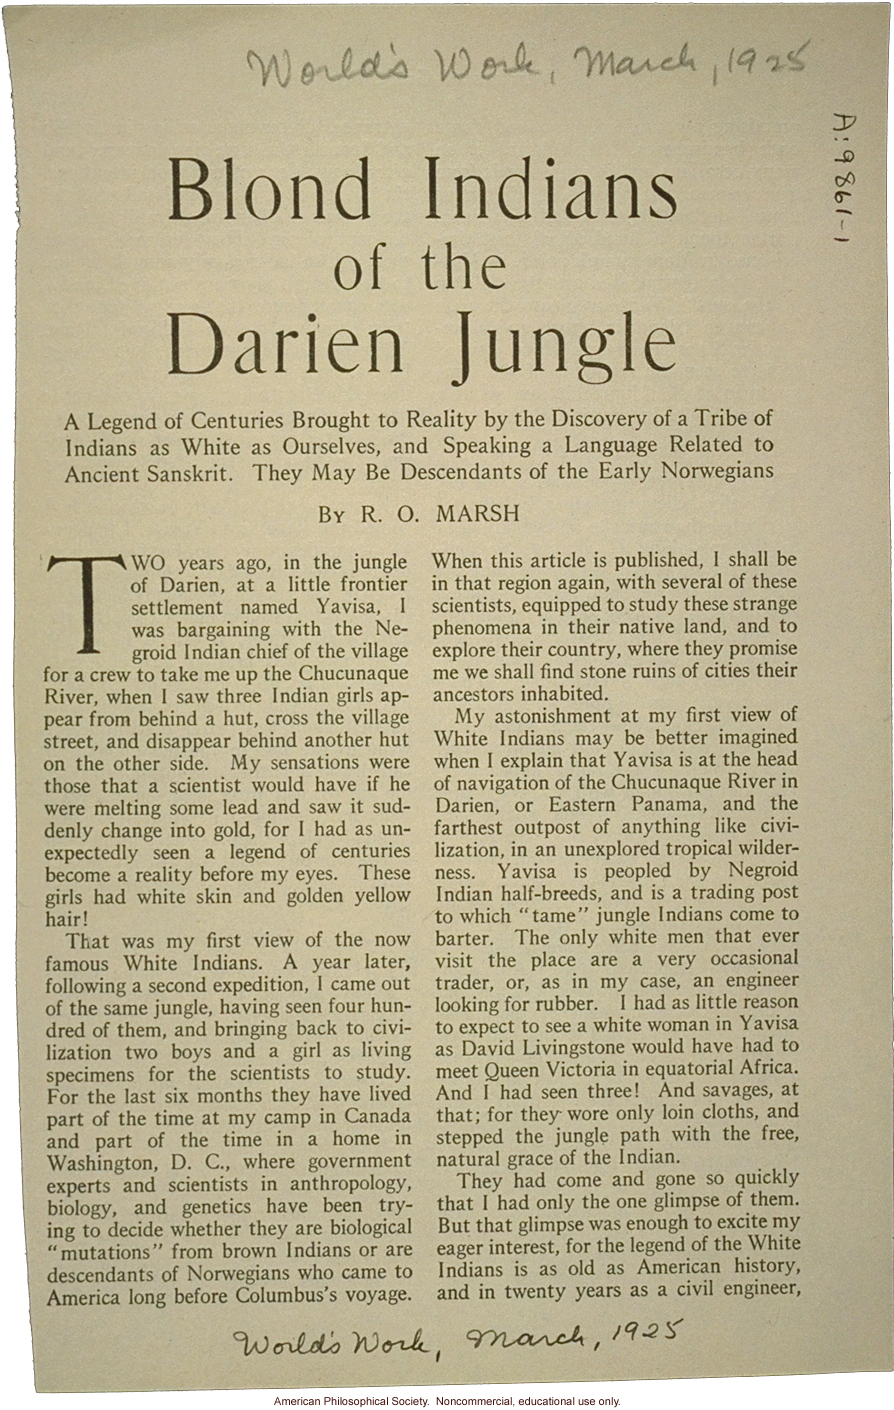 &quote;Blond Indians of the Darien jungle,&quote; by R.O. Marsh, World's Work